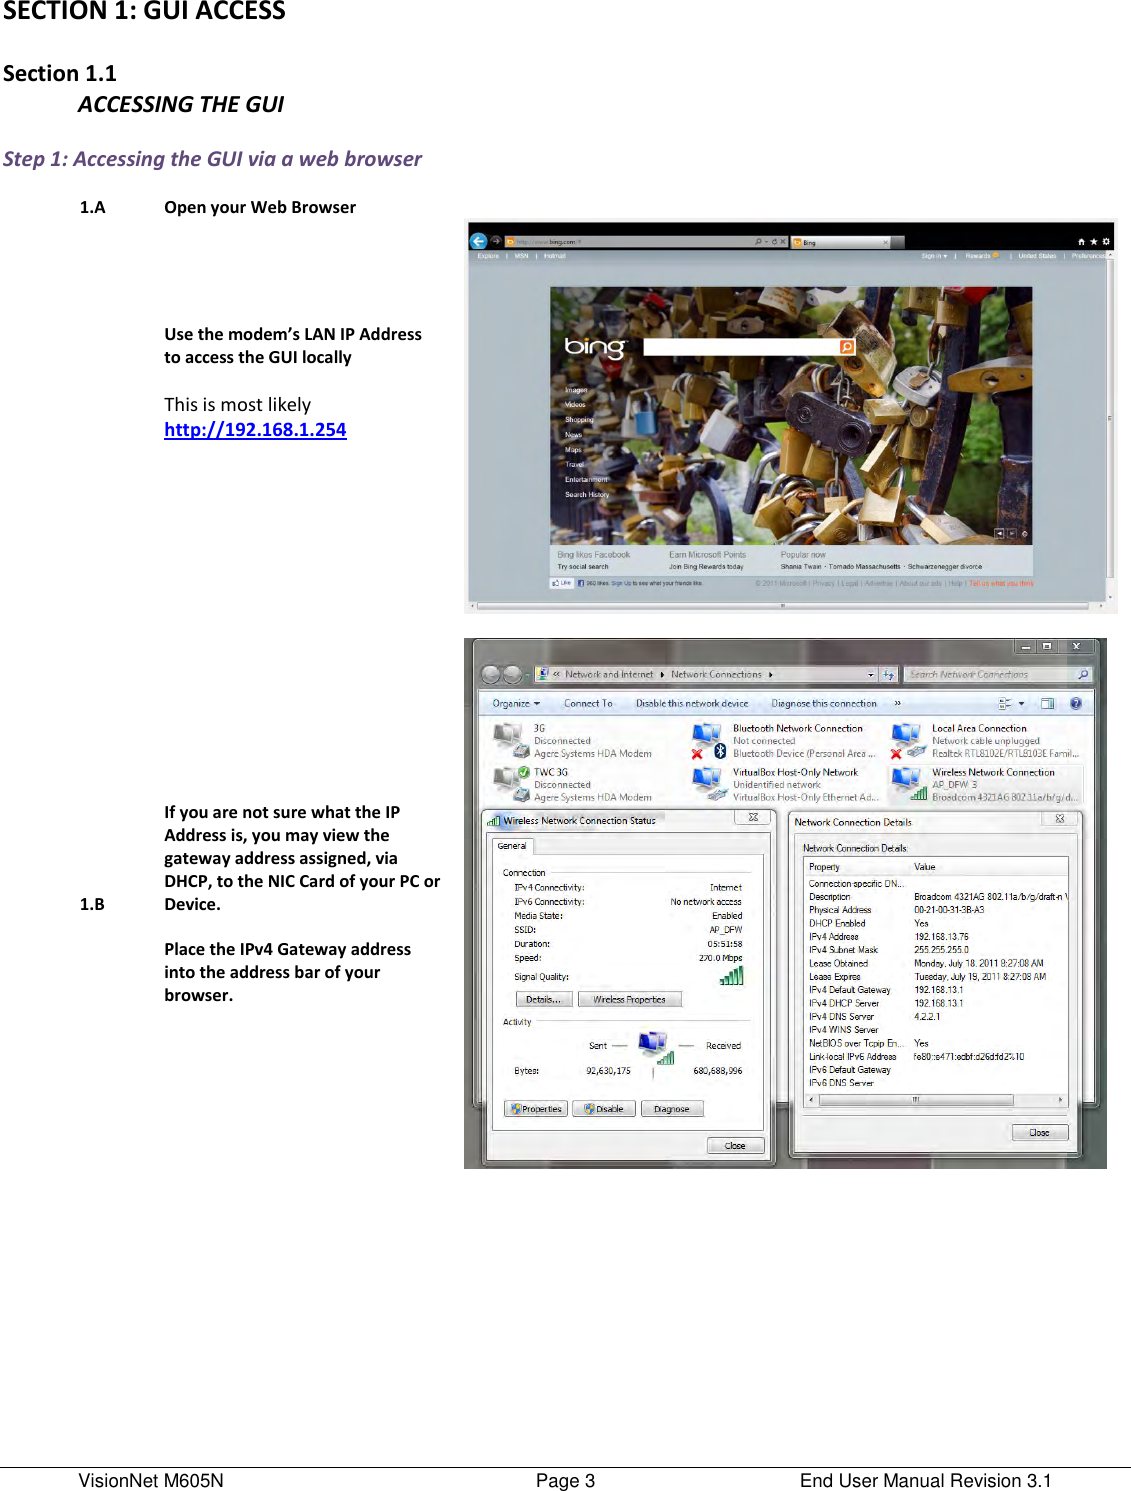 VisionNet M605N    Page 3  End User Manual Revision 3.1 SECTION 1: GUI ACCESS  Section 1.1 ACCESSING THE GUI  Step 1: Accessing the GUI via a web browser     1.A Open your Web Browser    Use the modem’s LAN IP Address to access the GUI locally  This is most likely http://192.168.1.254          1.B If you are not sure what the IP Address is, you may view the gateway address assigned, via DHCP, to the NIC Card of your PC or Device.   Place the IPv4 Gateway address into the address bar of your browser.          